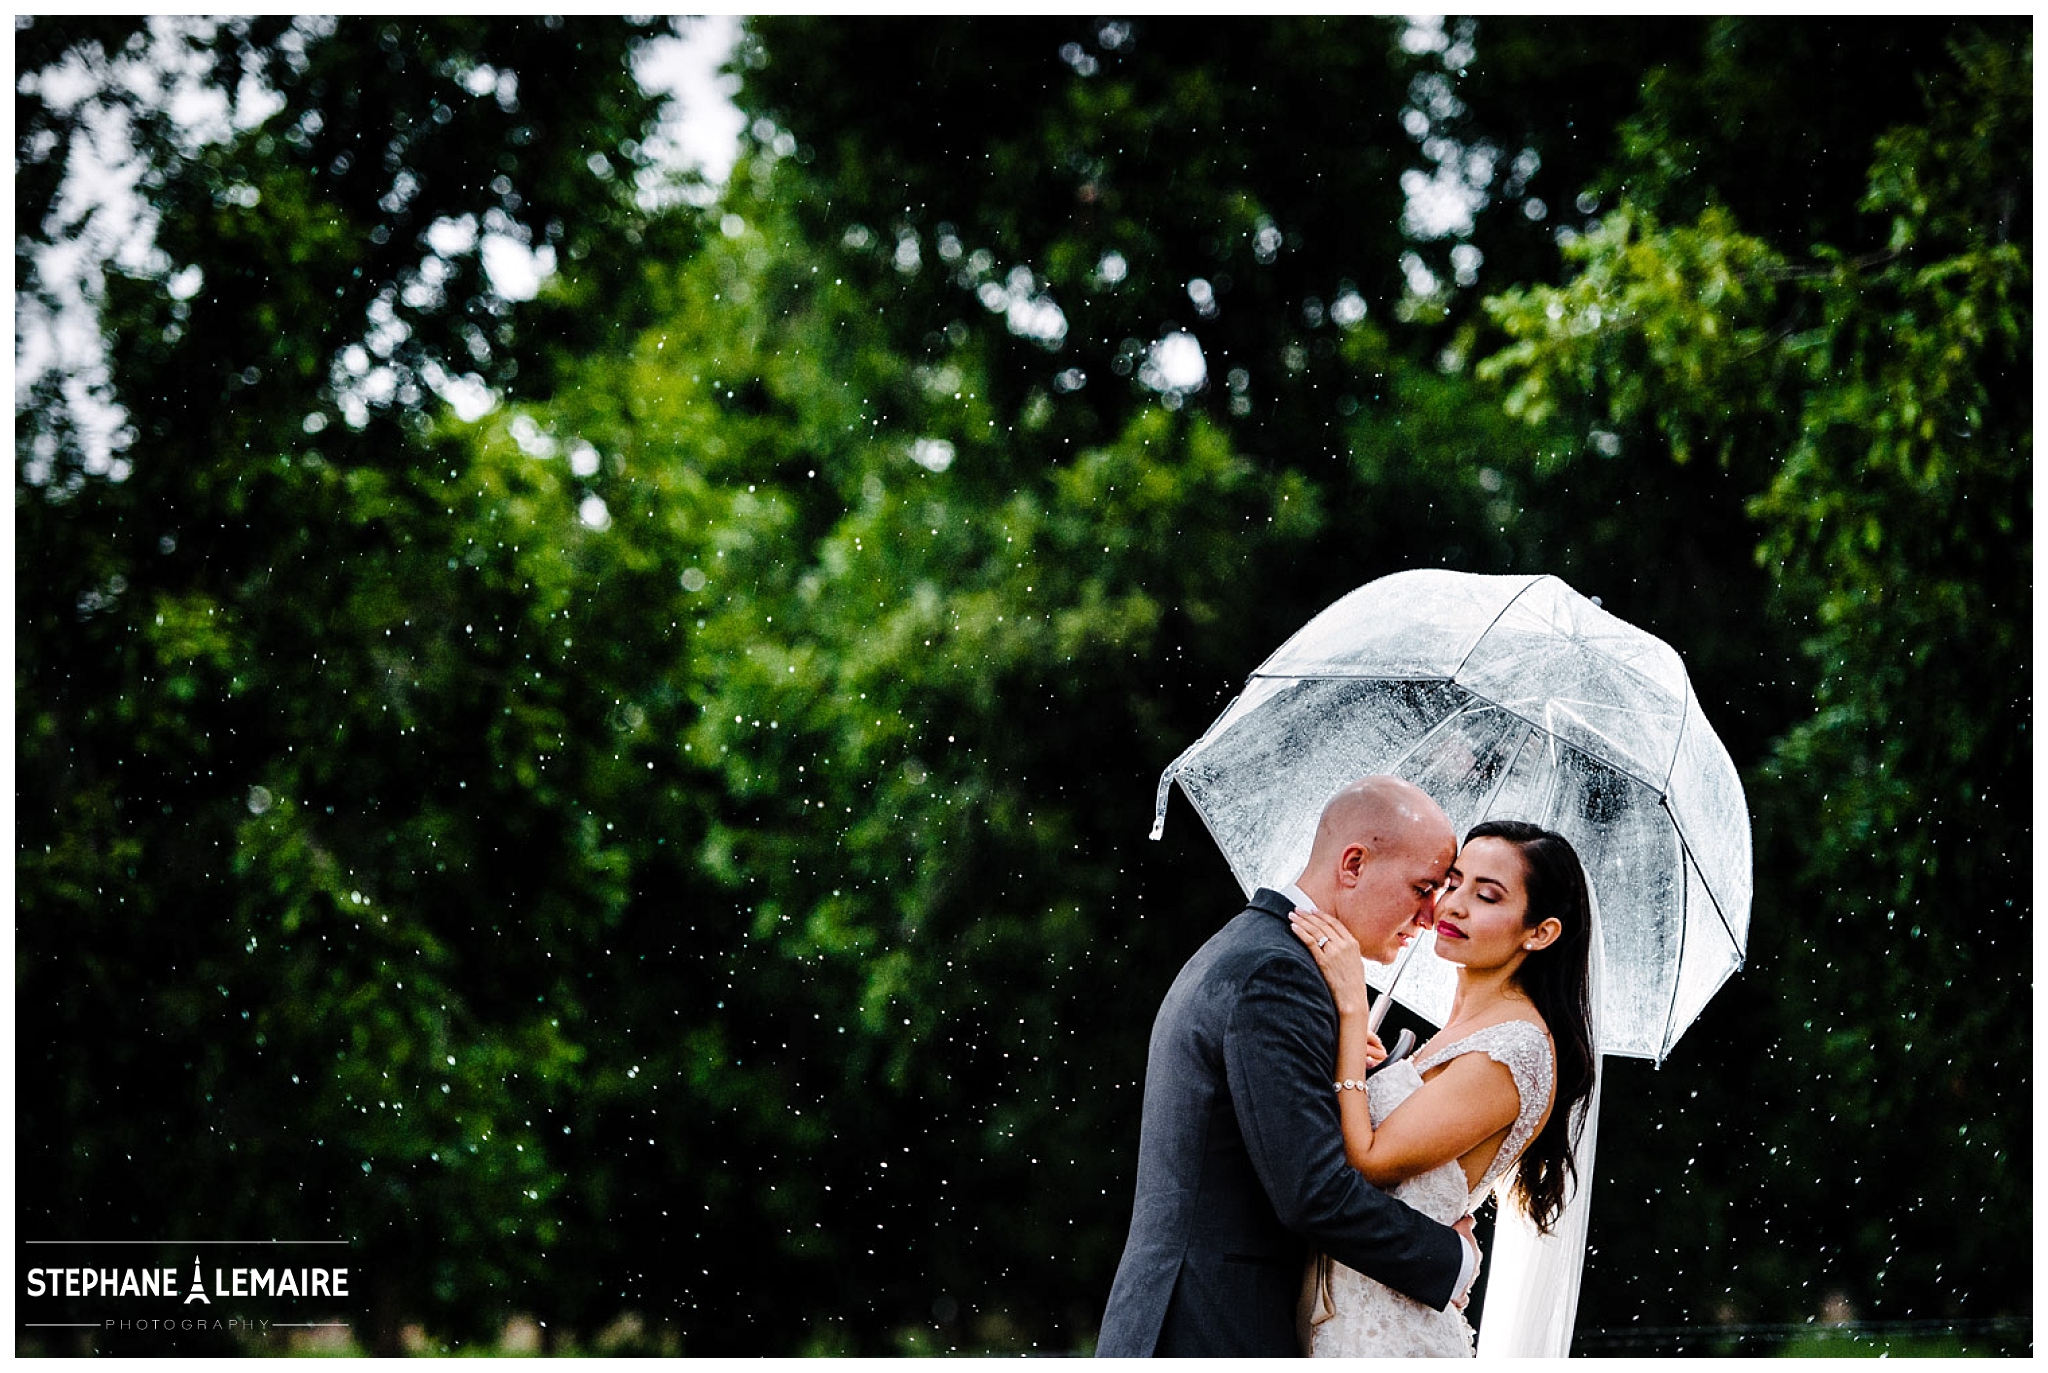 Portraits of Bride and Groom in rain holding umbrella at Jardines Arco Iris Wedding by Stephane Lemaire 